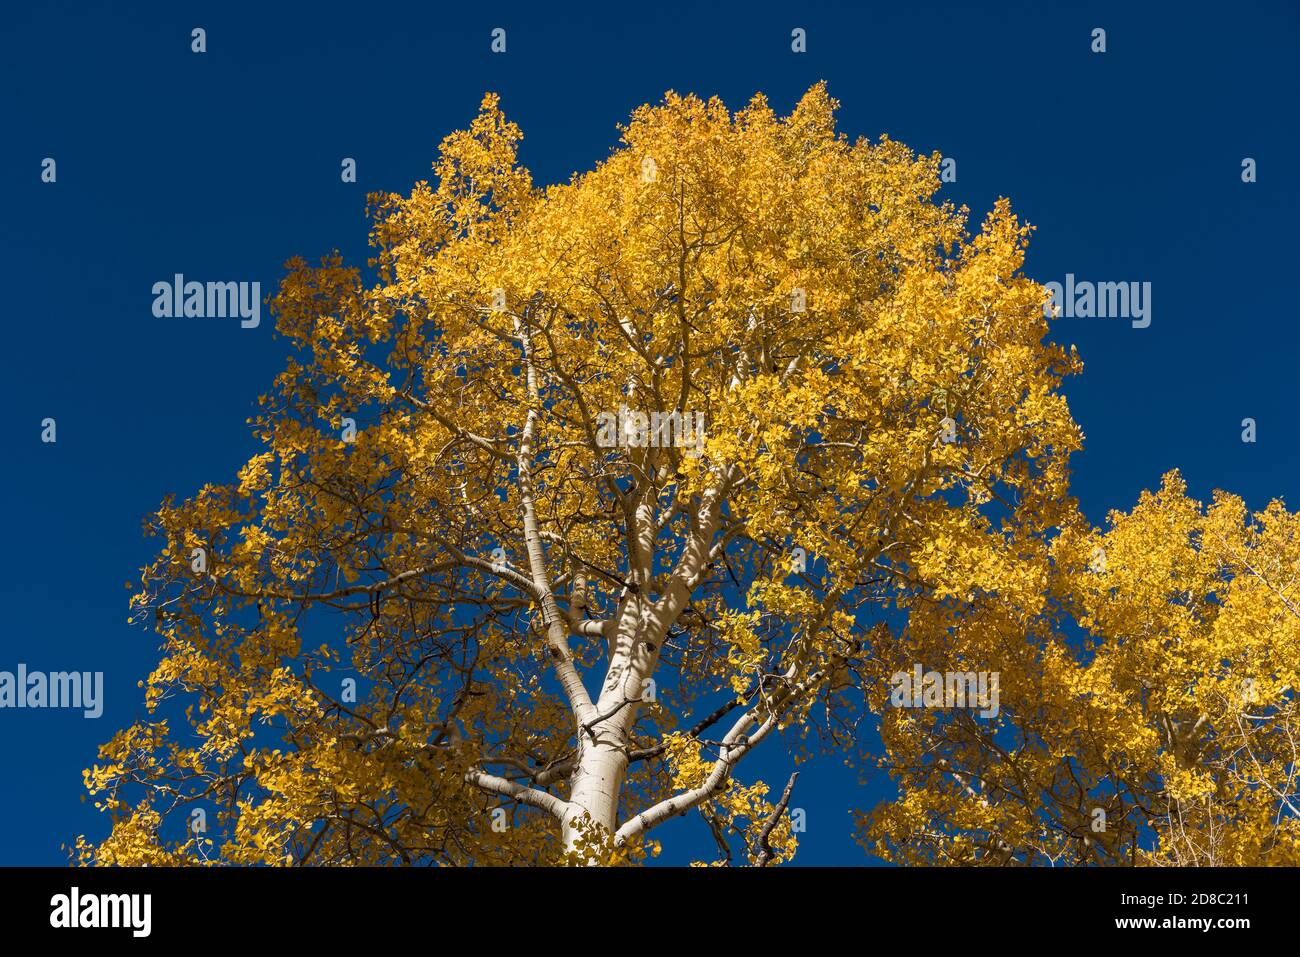 Quaking aspen trees in fall colors in the Manti-La Sal National Forest near Moab, Utah. Stock Photo